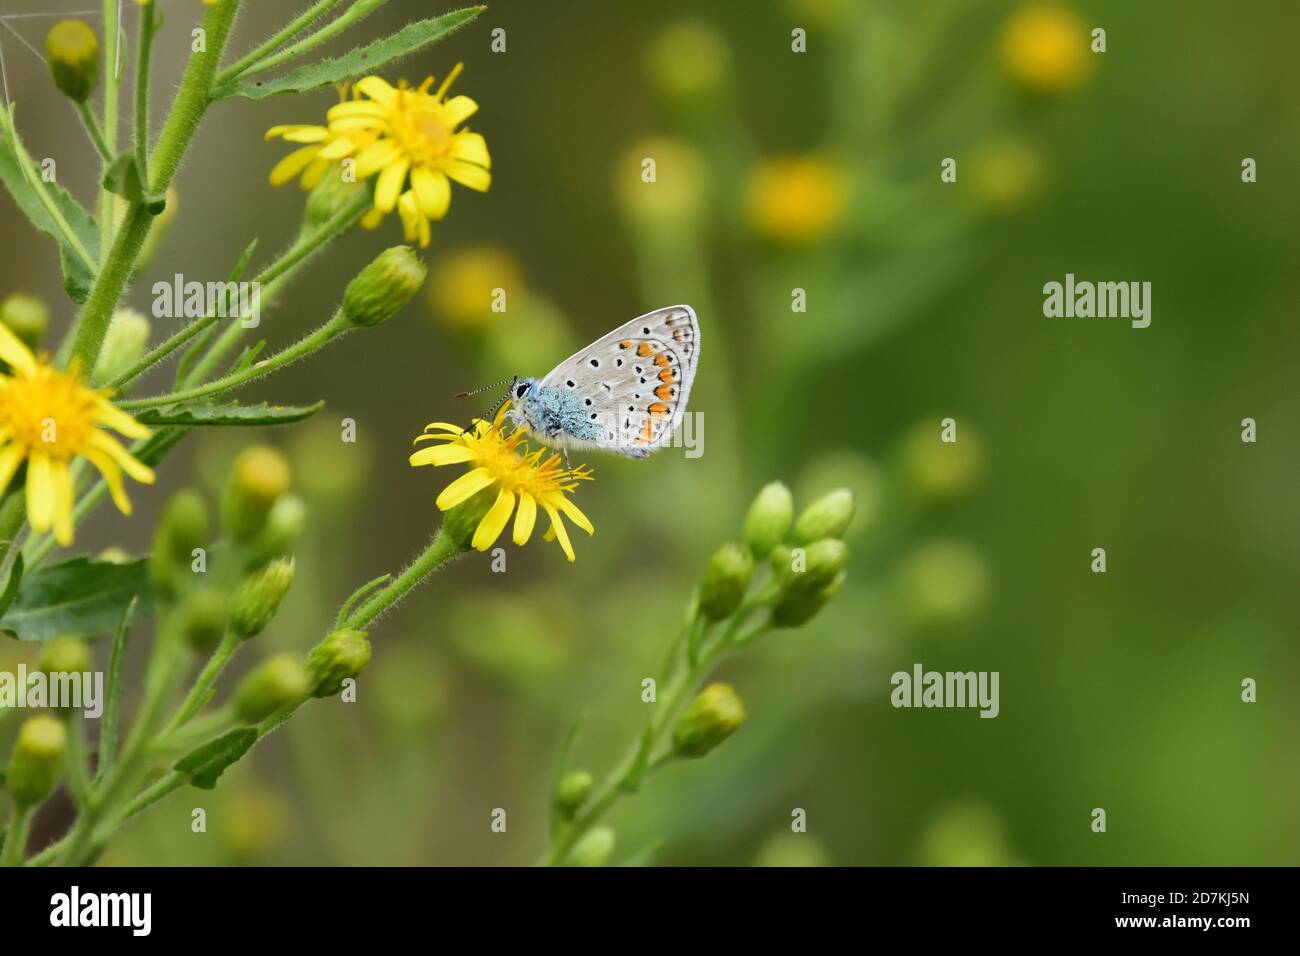 Macro photograph of a Polyommatus, a butterfly of the Lycaenidae family, taken in its natural habitat. Stock Photo